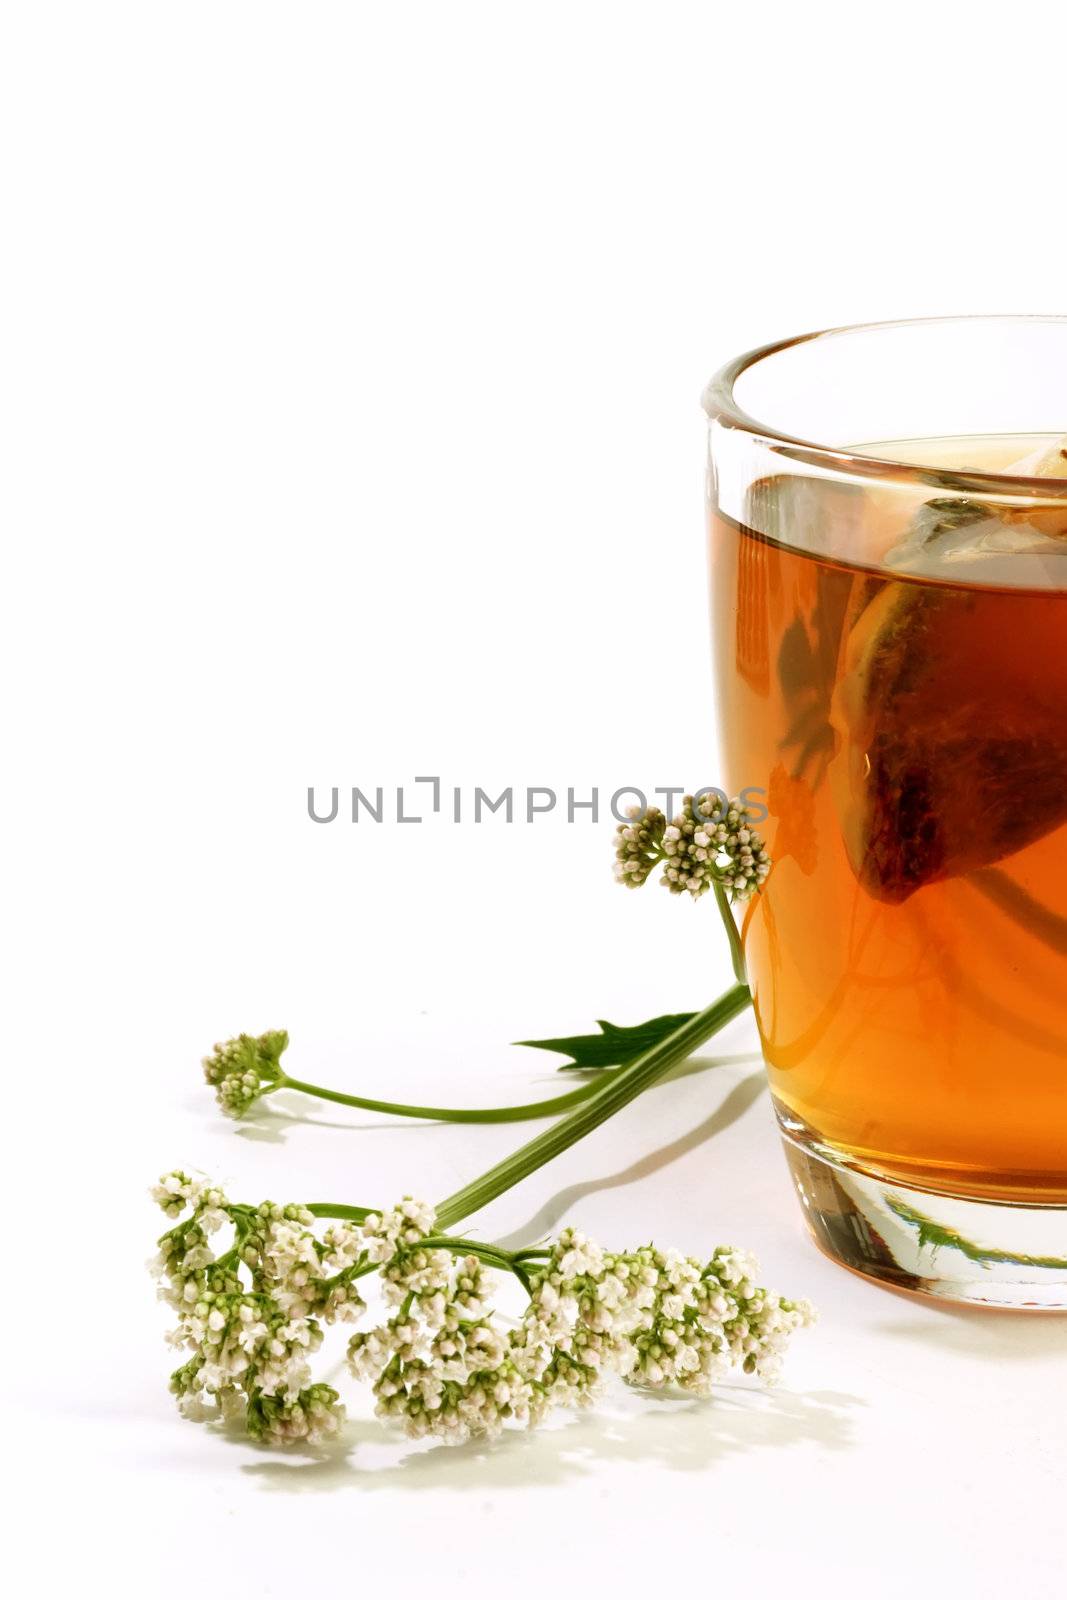 Herbal tea with teabag in a glass and valerian on white background